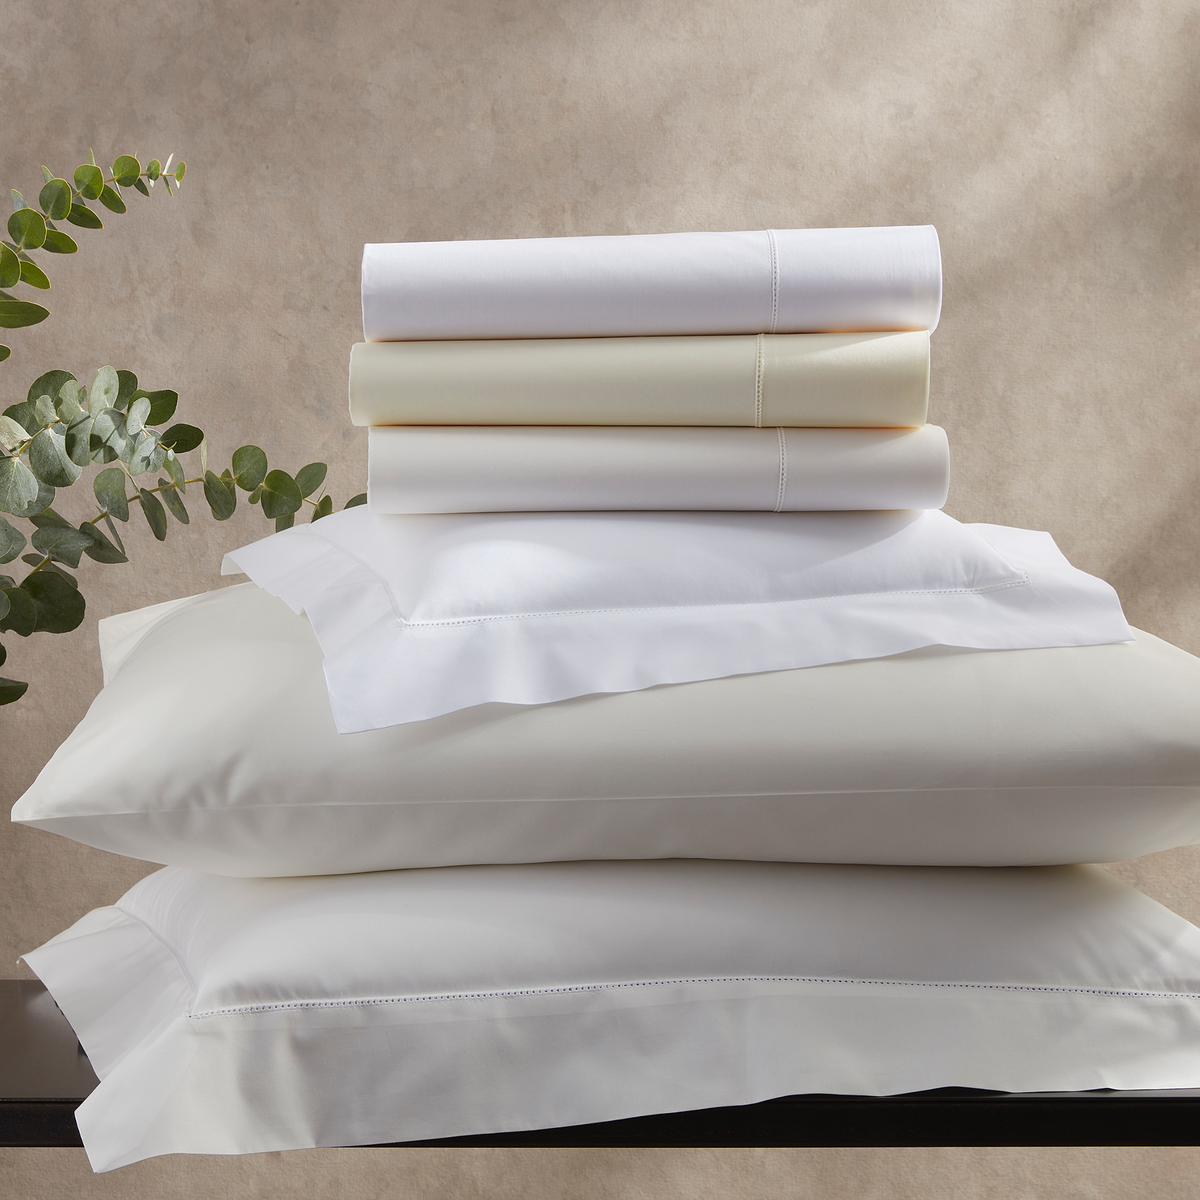 Stack of Matouk Luca Hemstitch Bedding in Assorted Colors